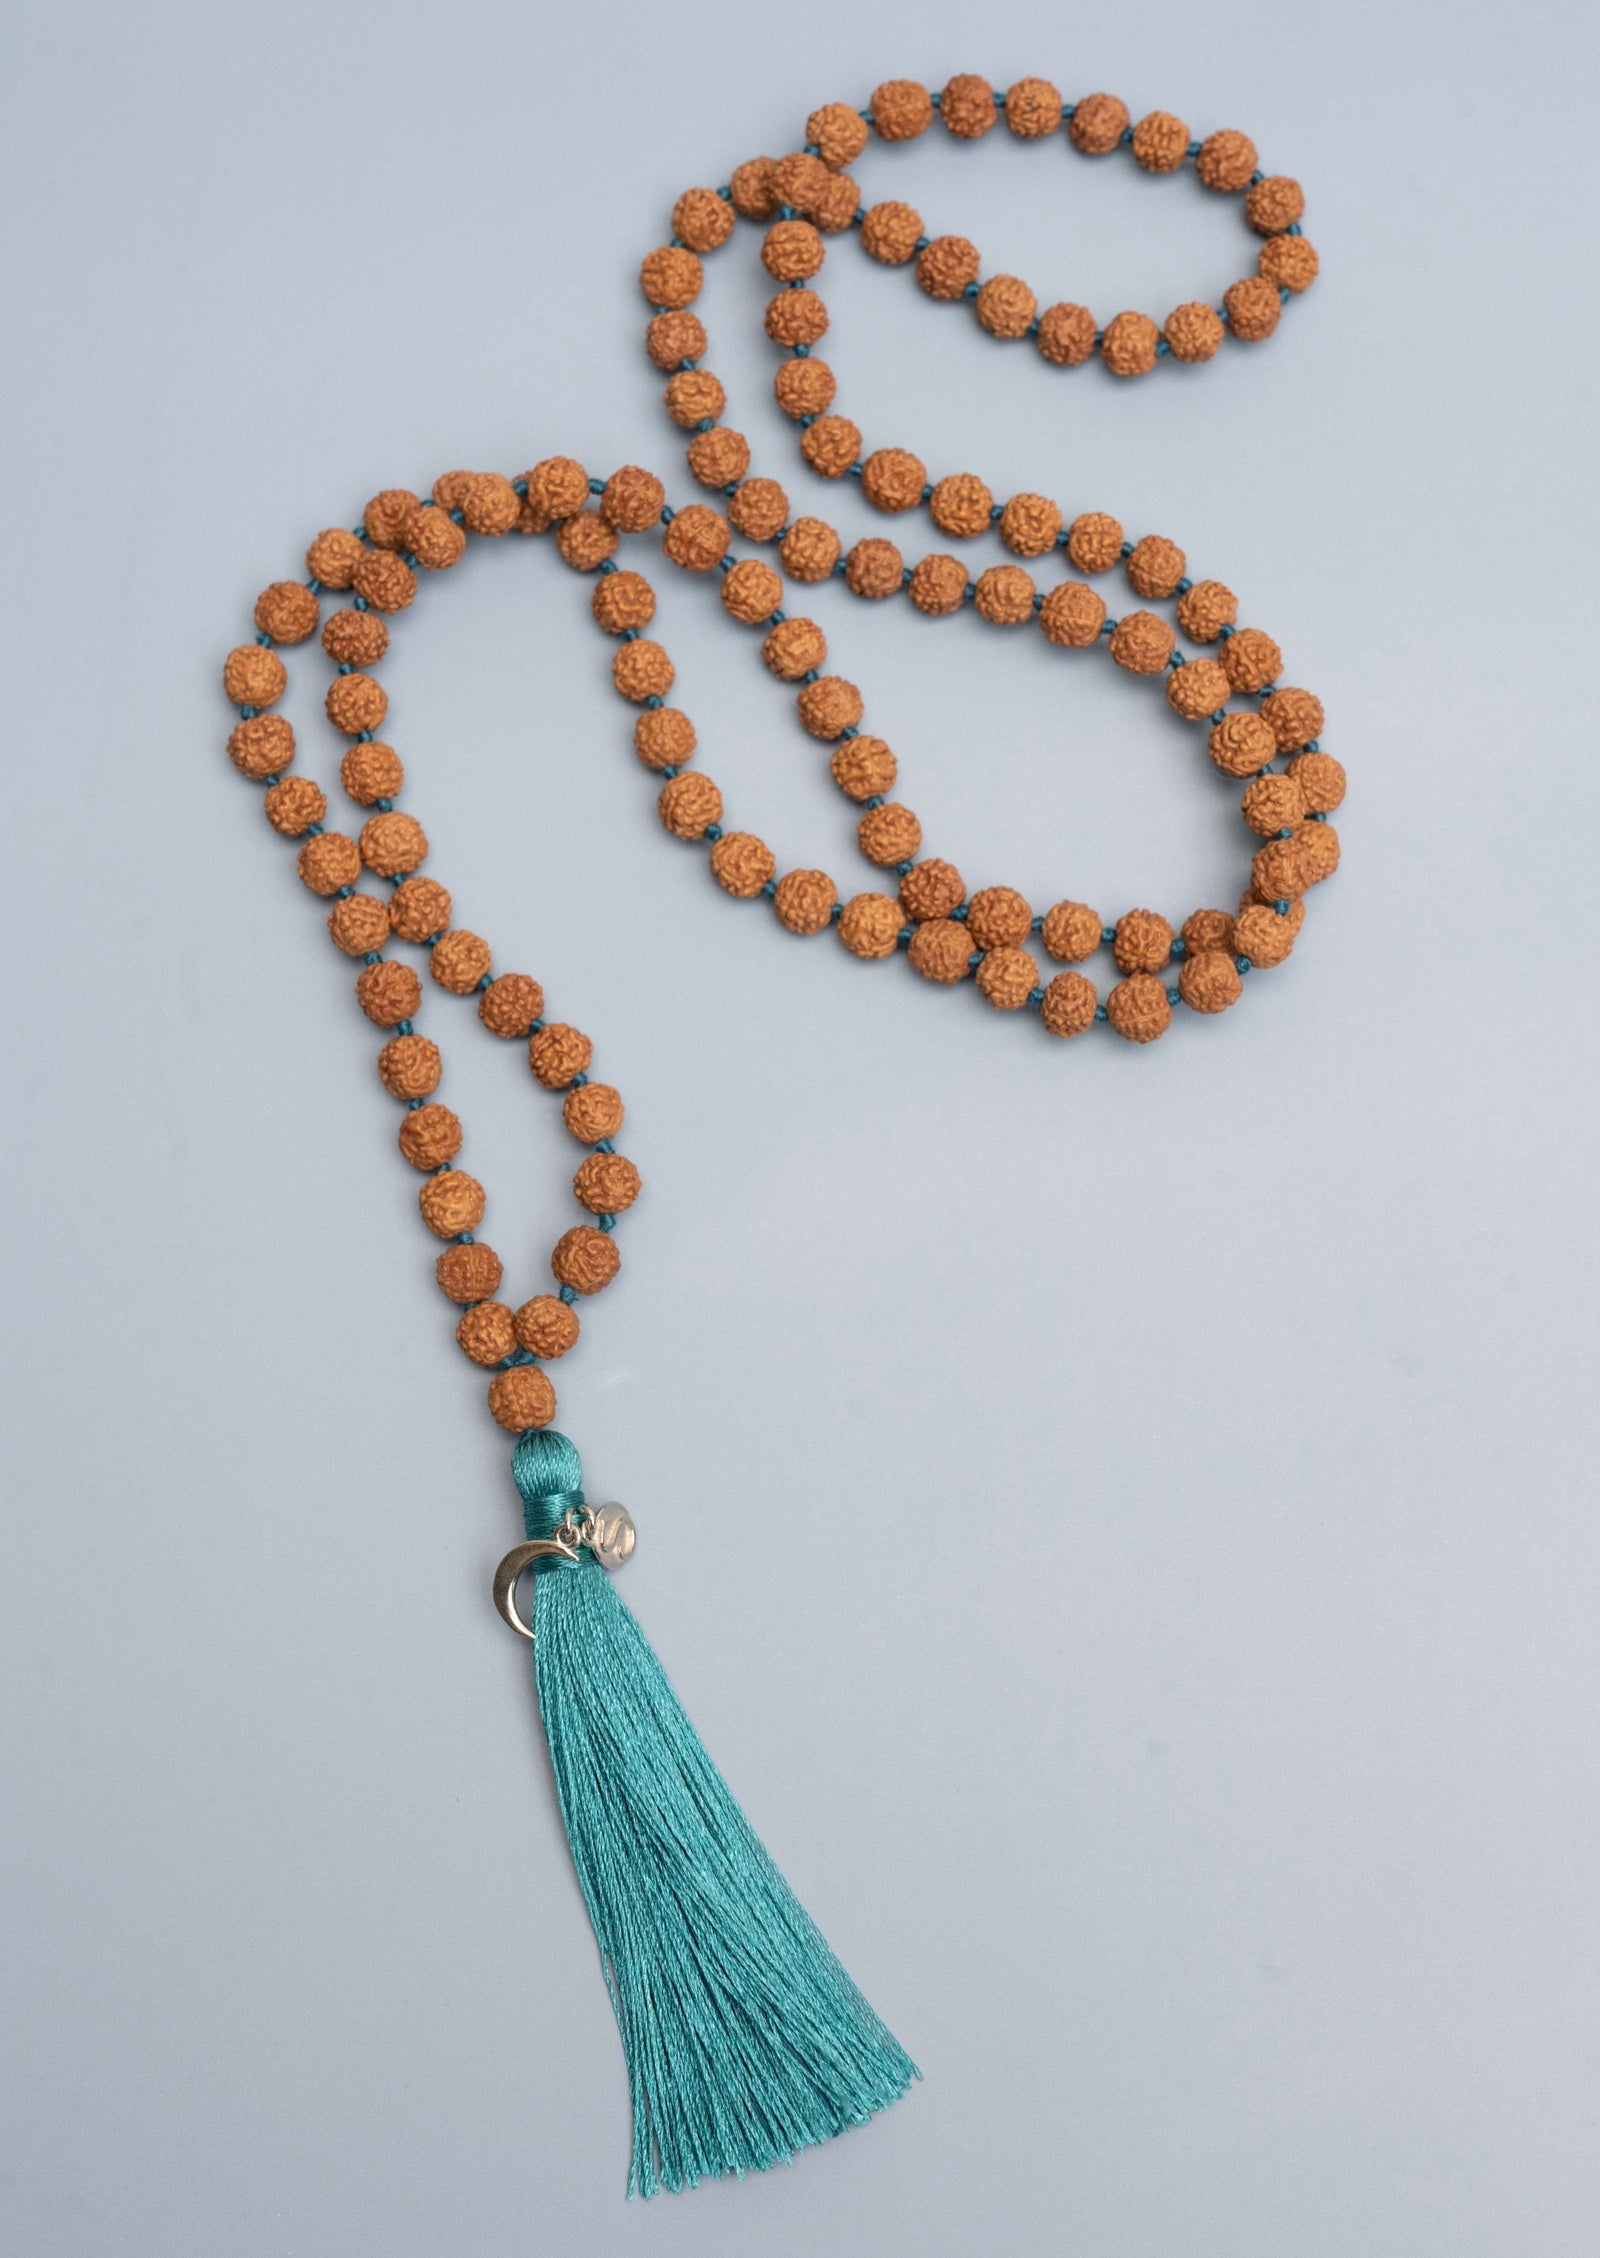 Benefits of wearing a Mala, Prayer Beads, Mantra Repetition & Practice -  Shivoham